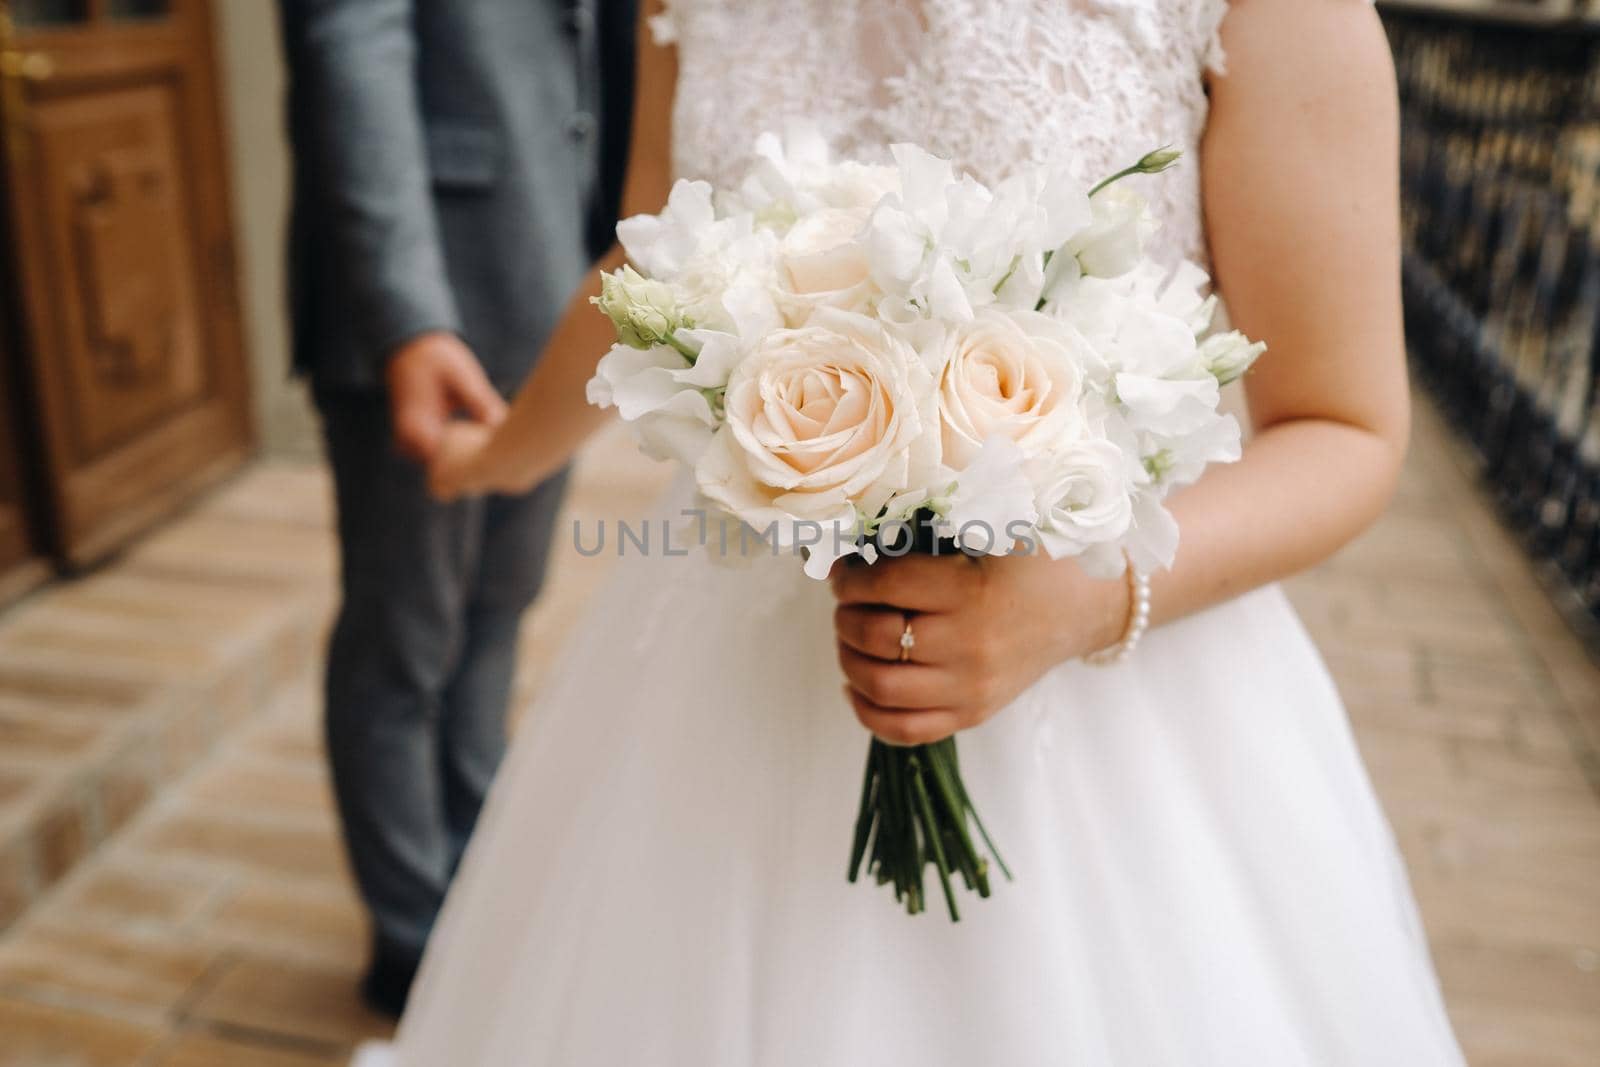 The bride holds a wedding bouquet of roses in her hands. Wedding floristry by Lobachad